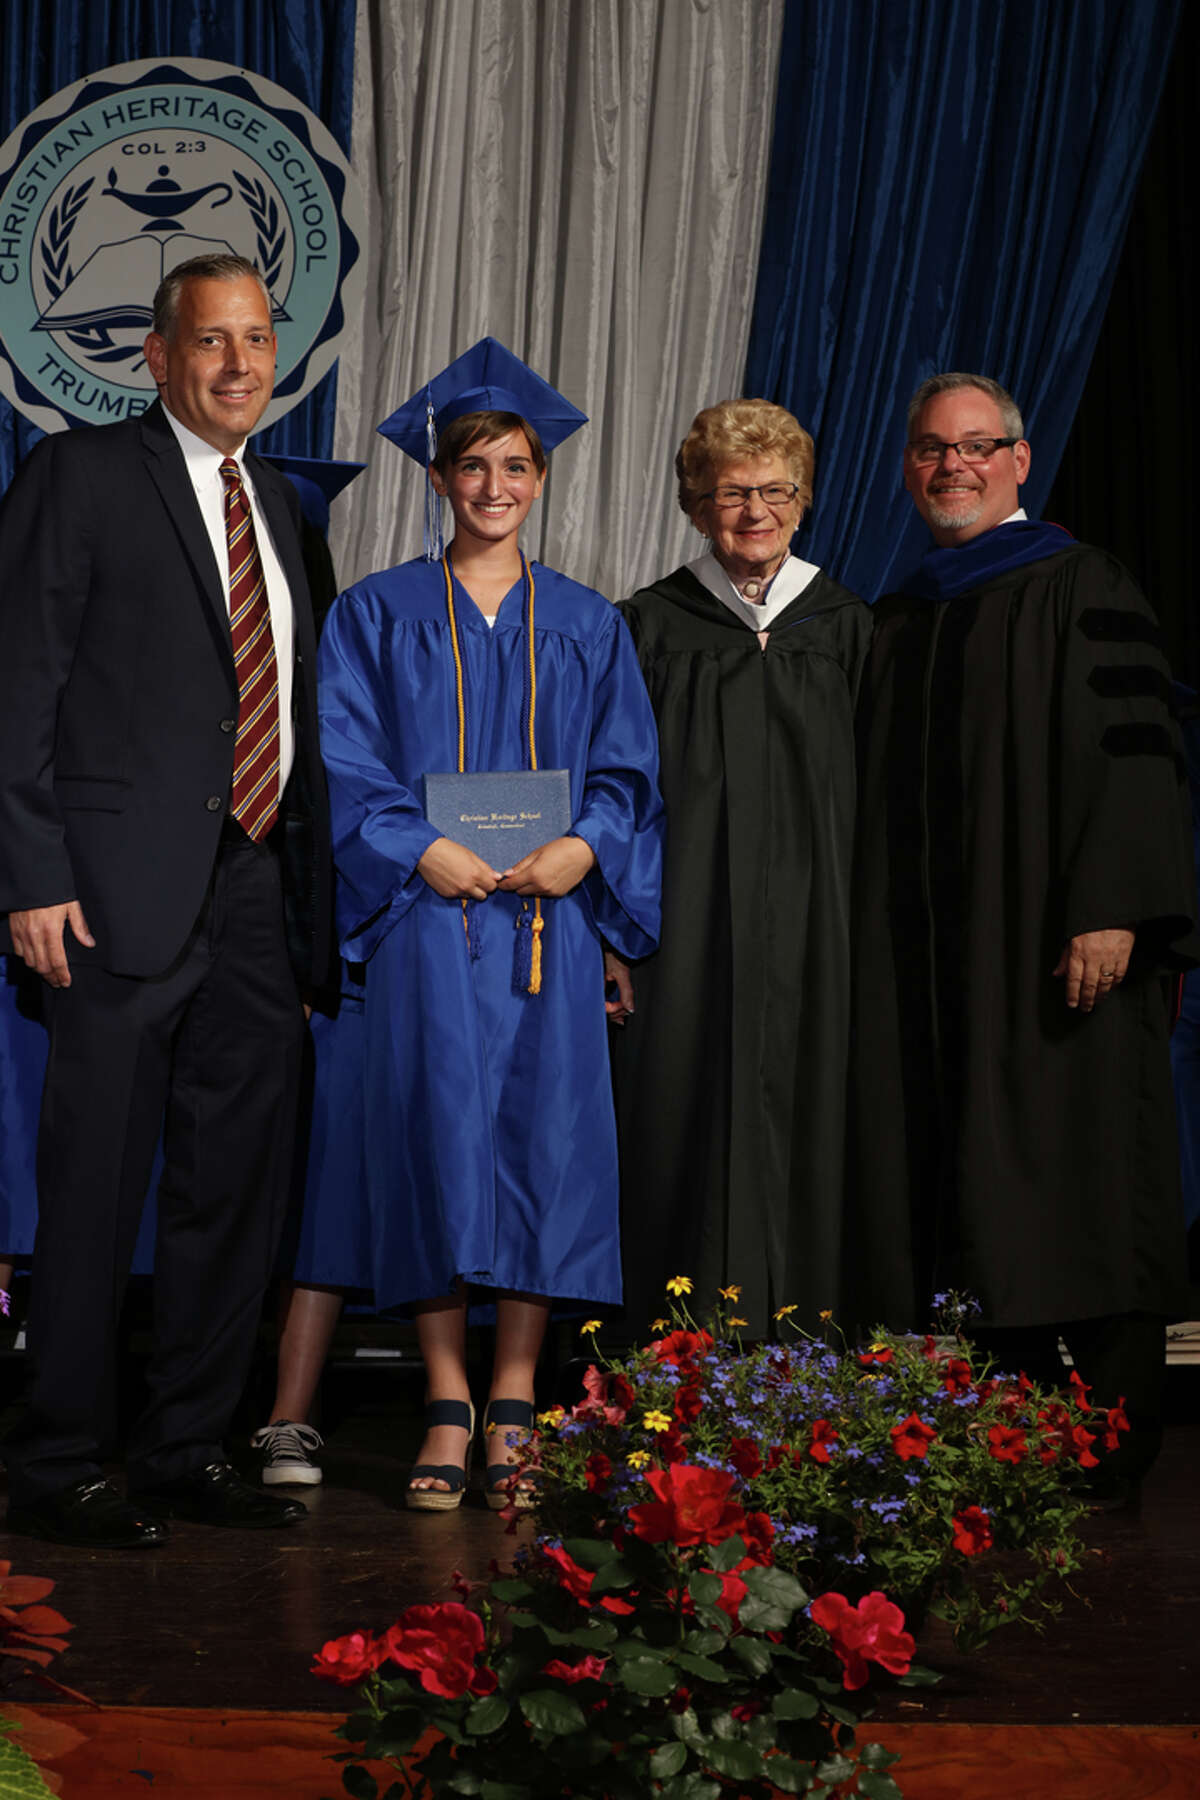 Christian Heritage School student Anais Anderson celebrates with school faculty at a graduation ceremony Saturday, June 11. Anderson, the great-granddaughter of the school’s founders Paul and June Anderson, is the 1,000th student to graduate from the Trumbull-based school.